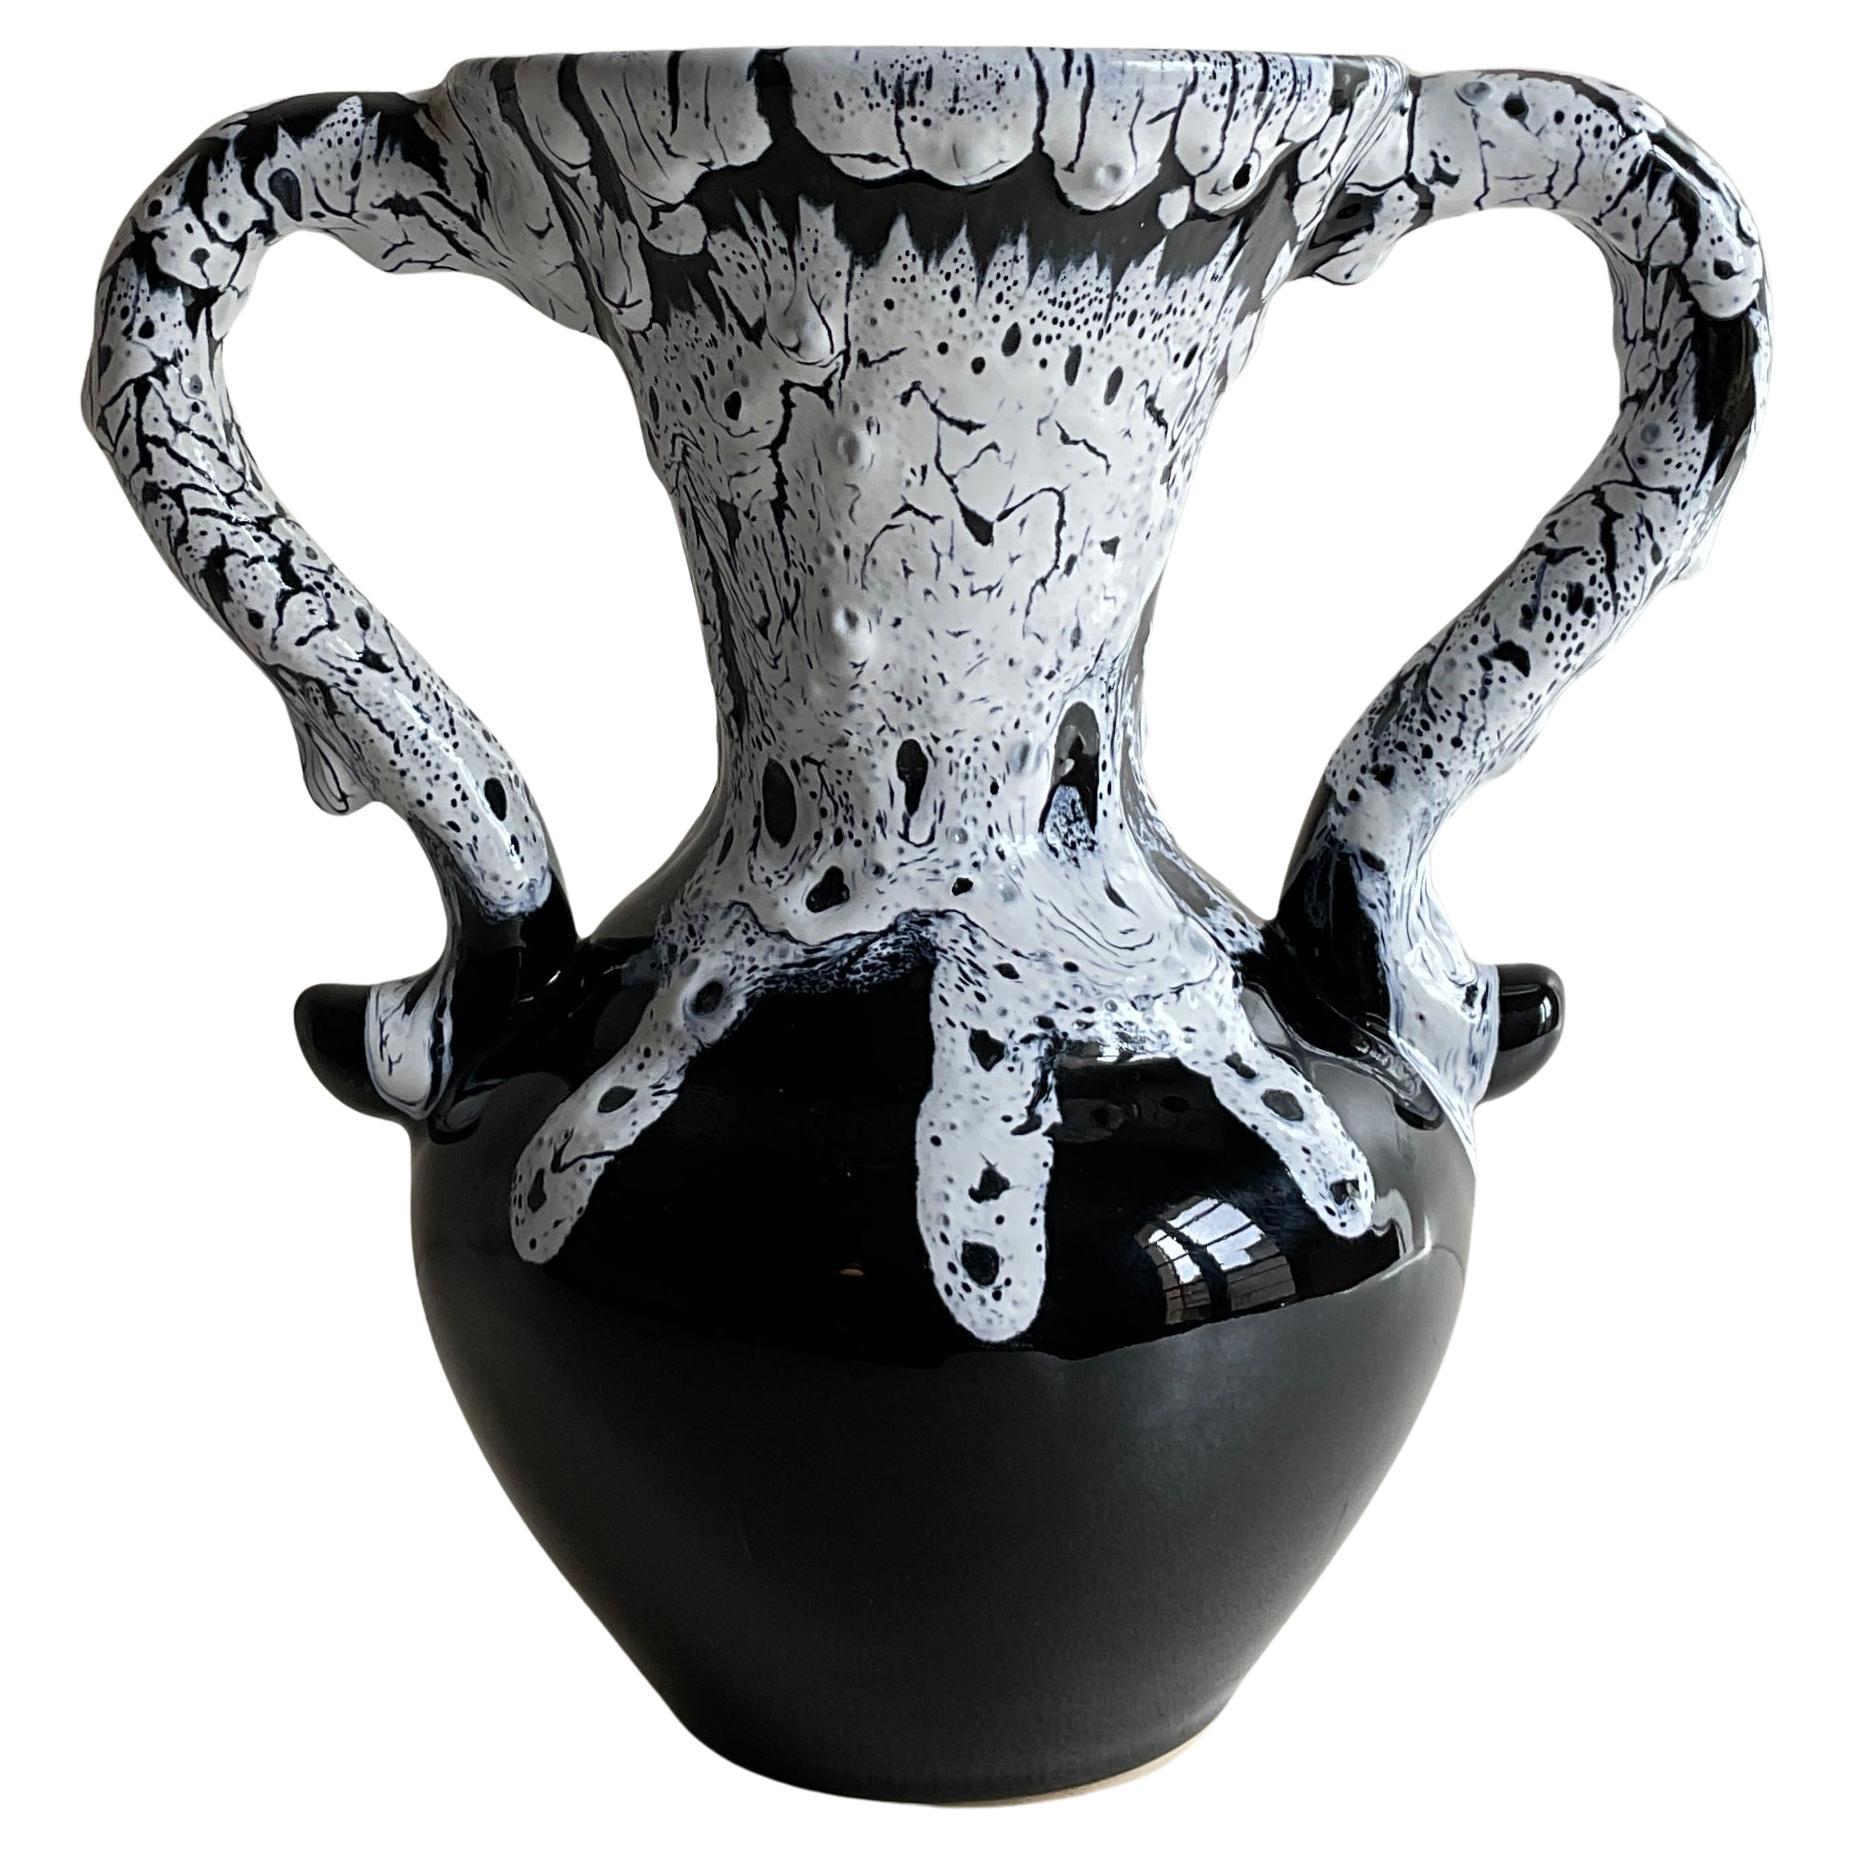 Fat Lava Vase With Handles From Fontaine De Vaucluse France For Sale